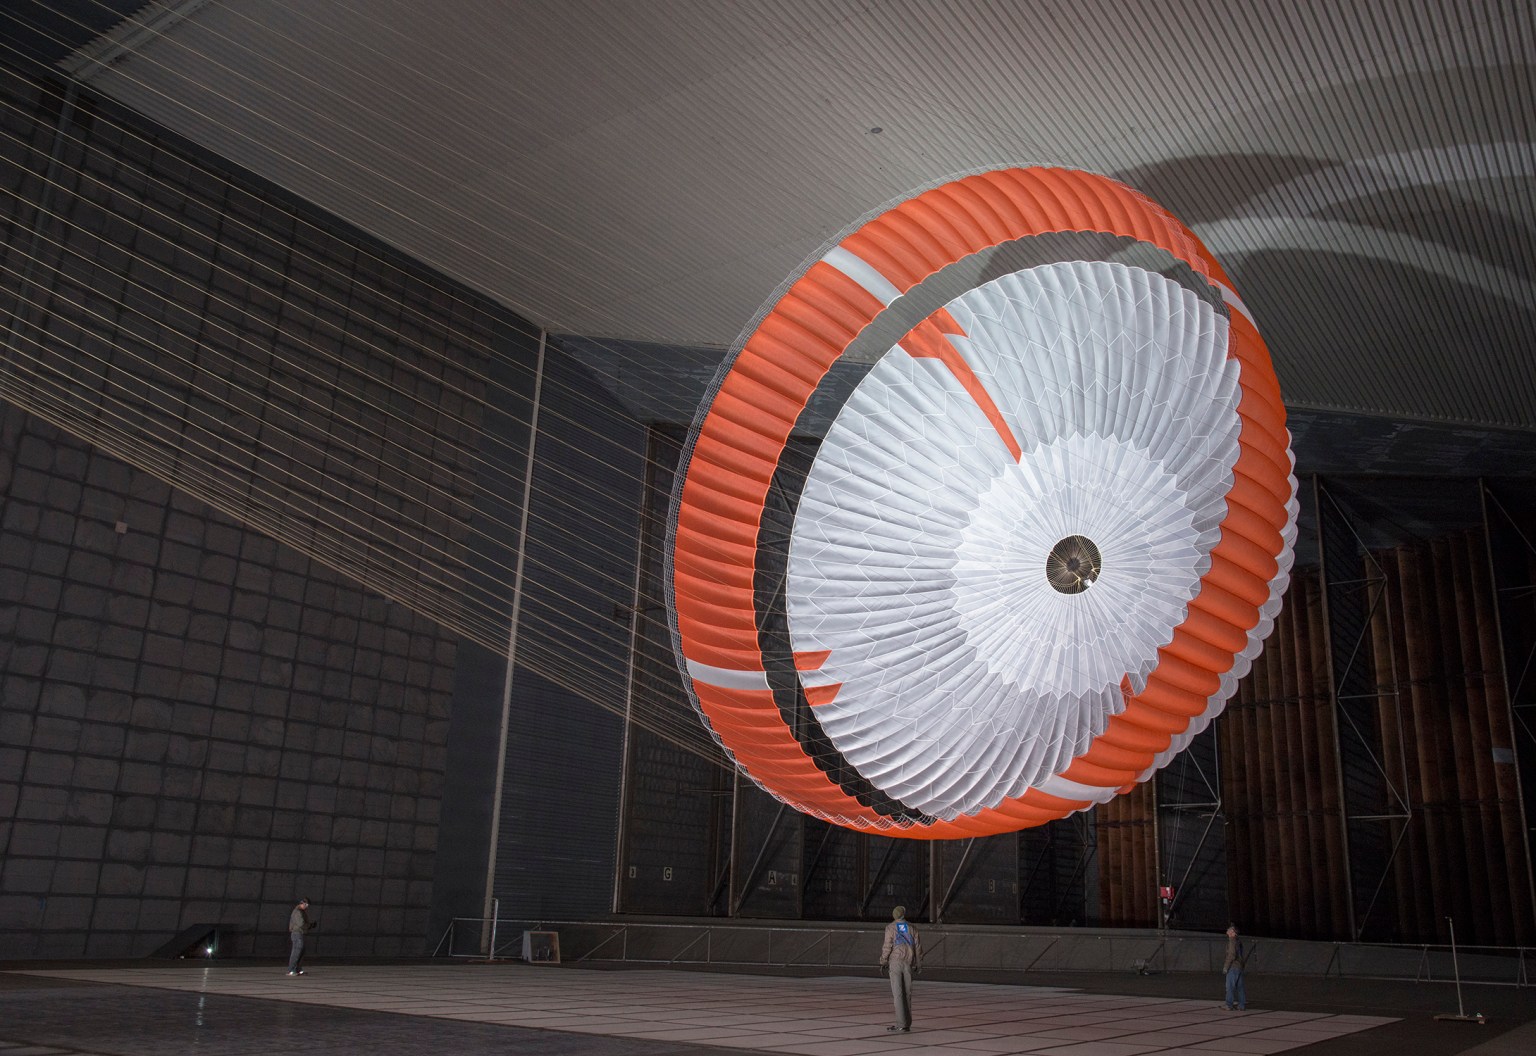 A Mars-type parachute is tested at the United States Air Force National Full-Scale Aerodynamics Complex 80- by 120-foot wind tunnel at NASA’s Ames Research Center